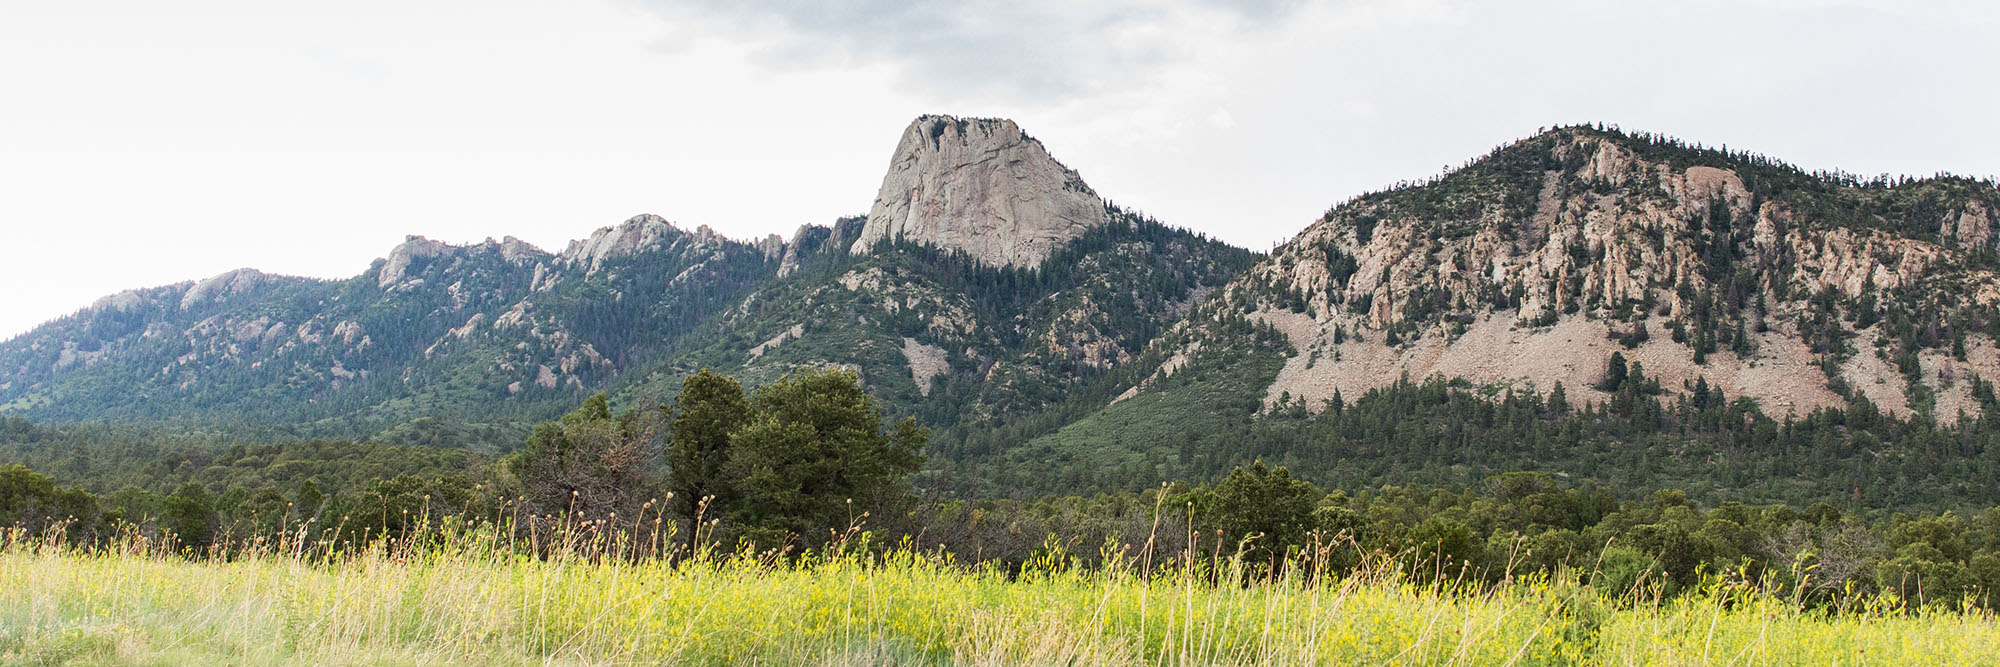 The mountains of Philmont